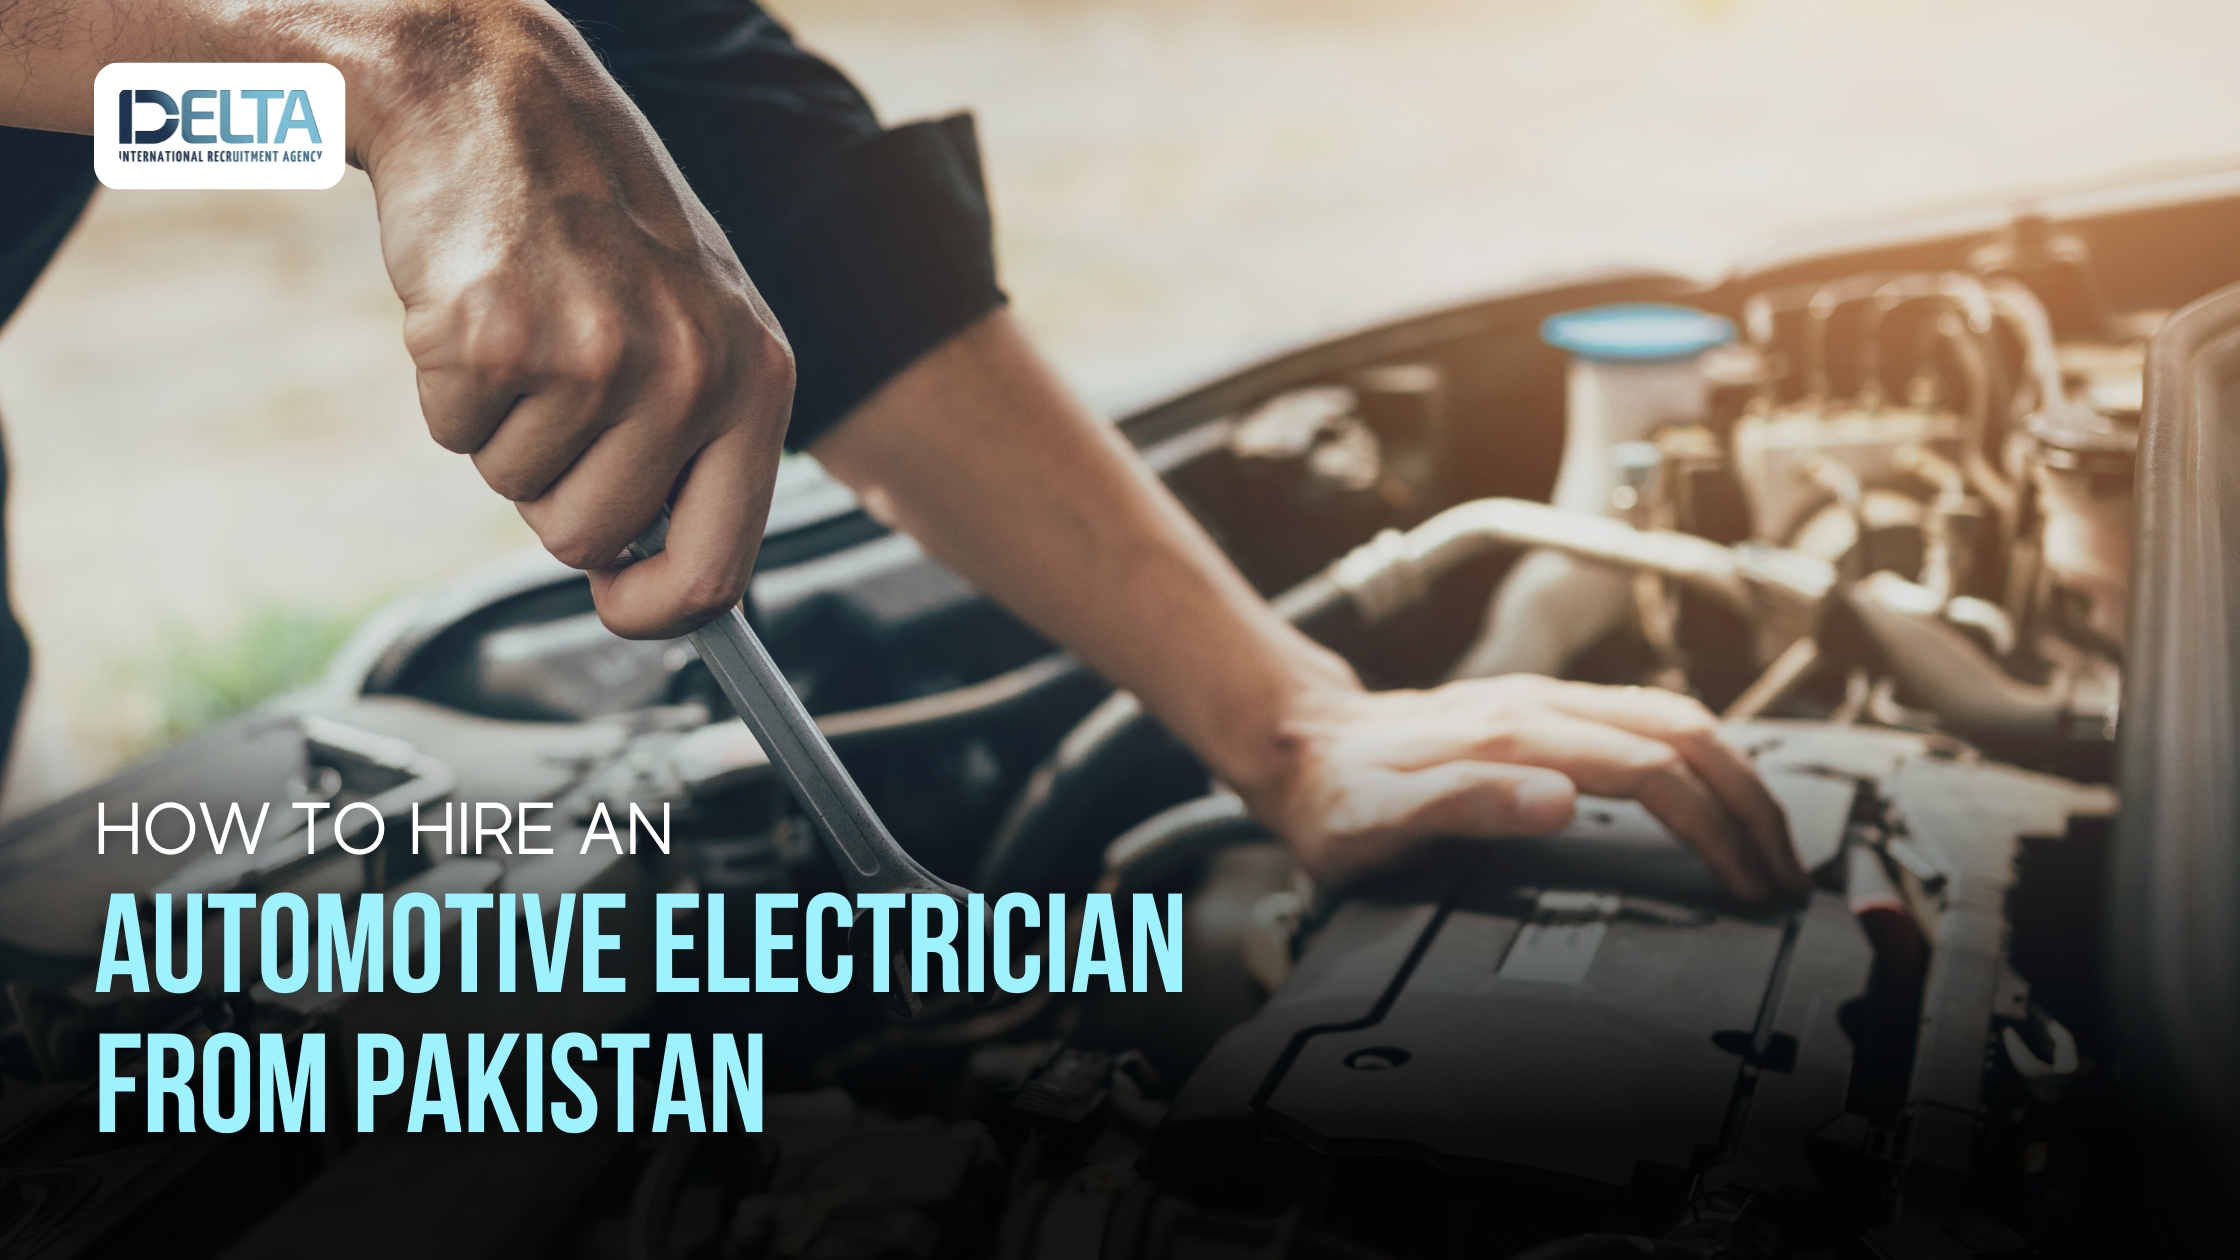 How to Hire an Automotive Electrician from Pakistan